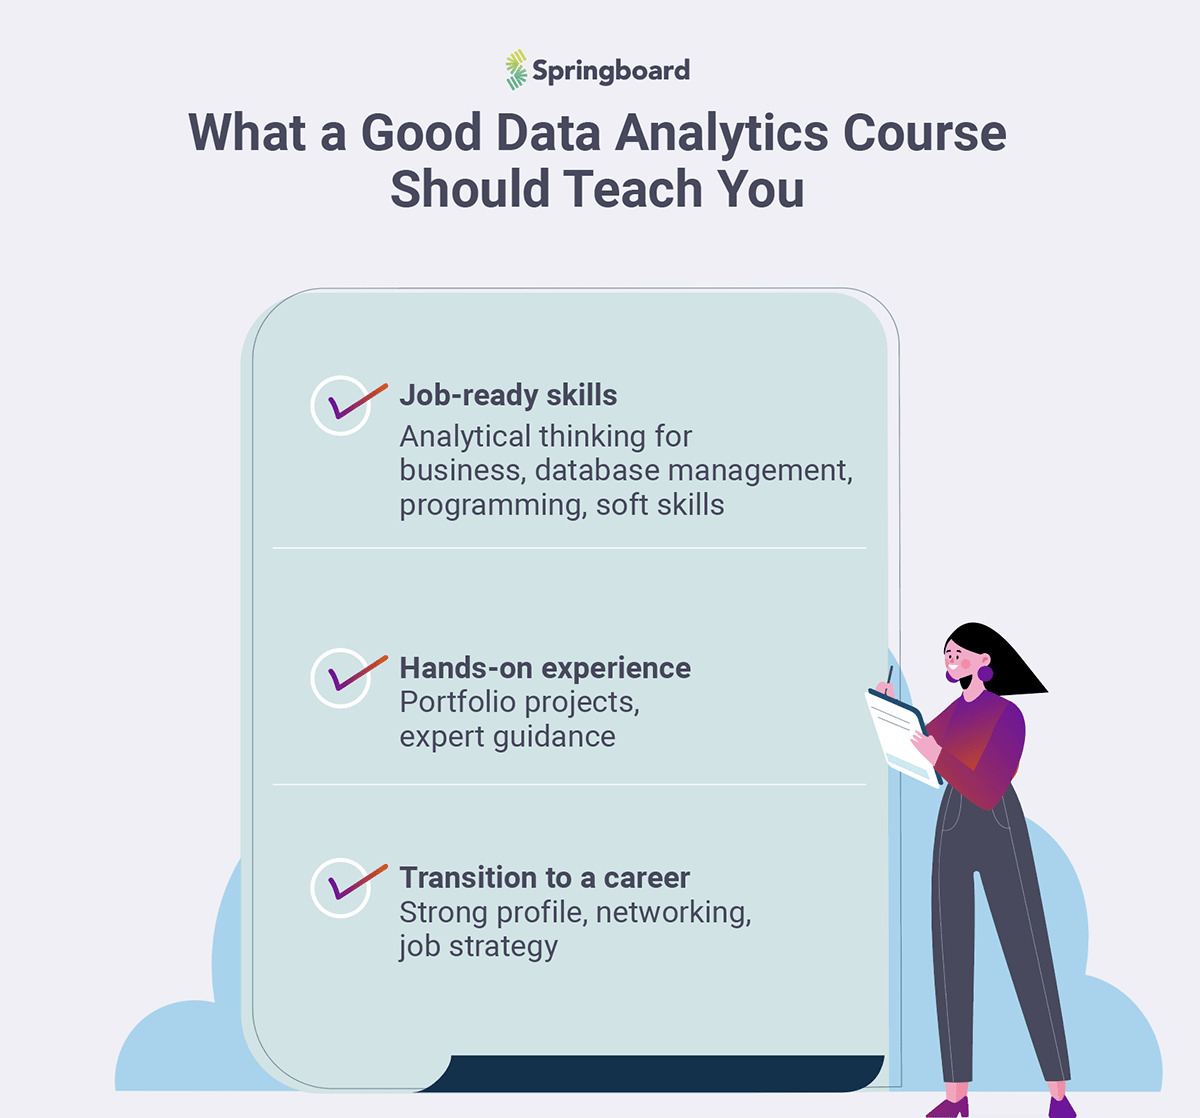 Data Analytics Training: What Should A Good Course Teach ...